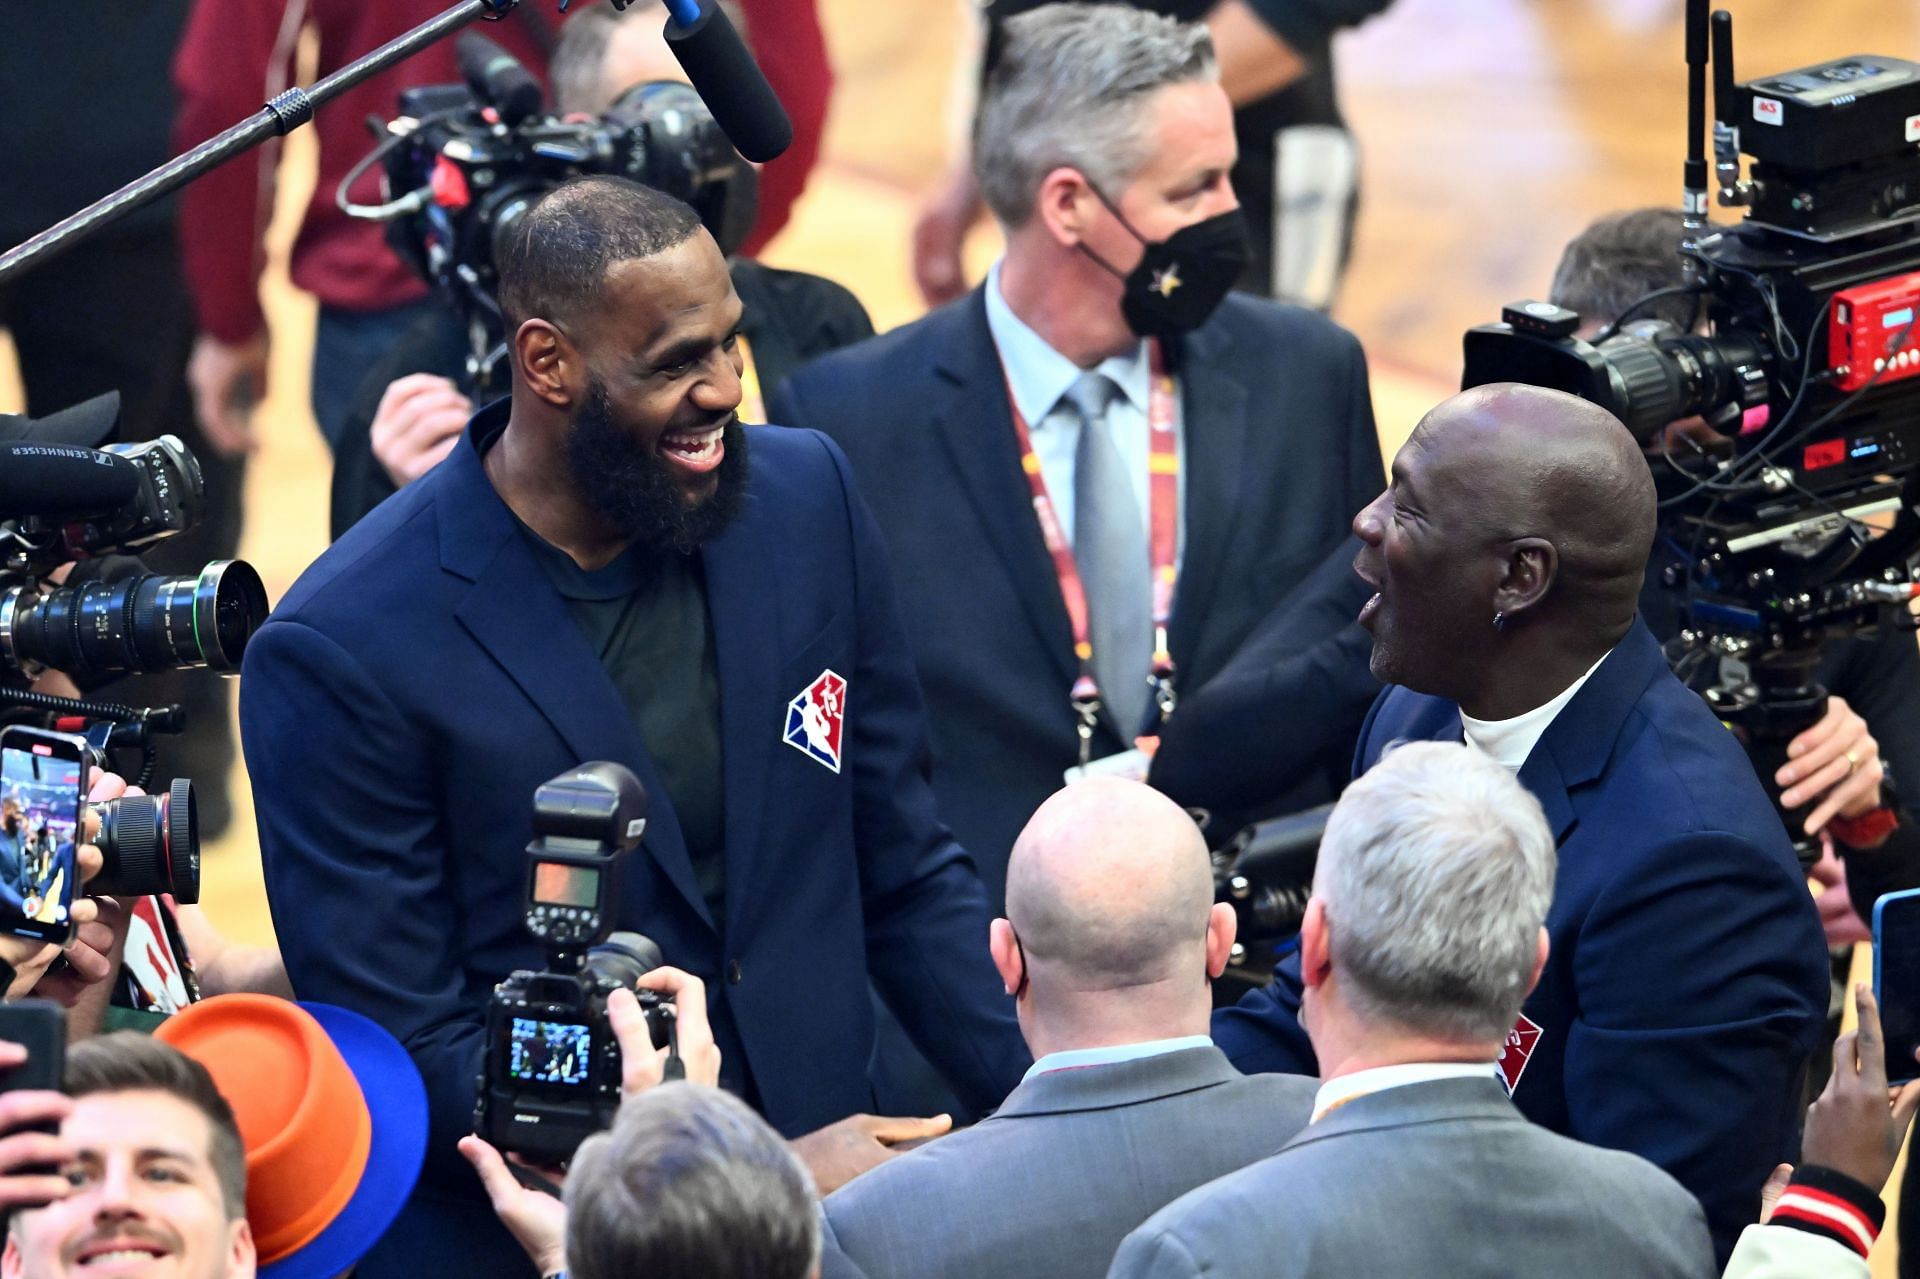 LeBron James, left, and Michael Jordan embrace each other during the All-Star Weekend.